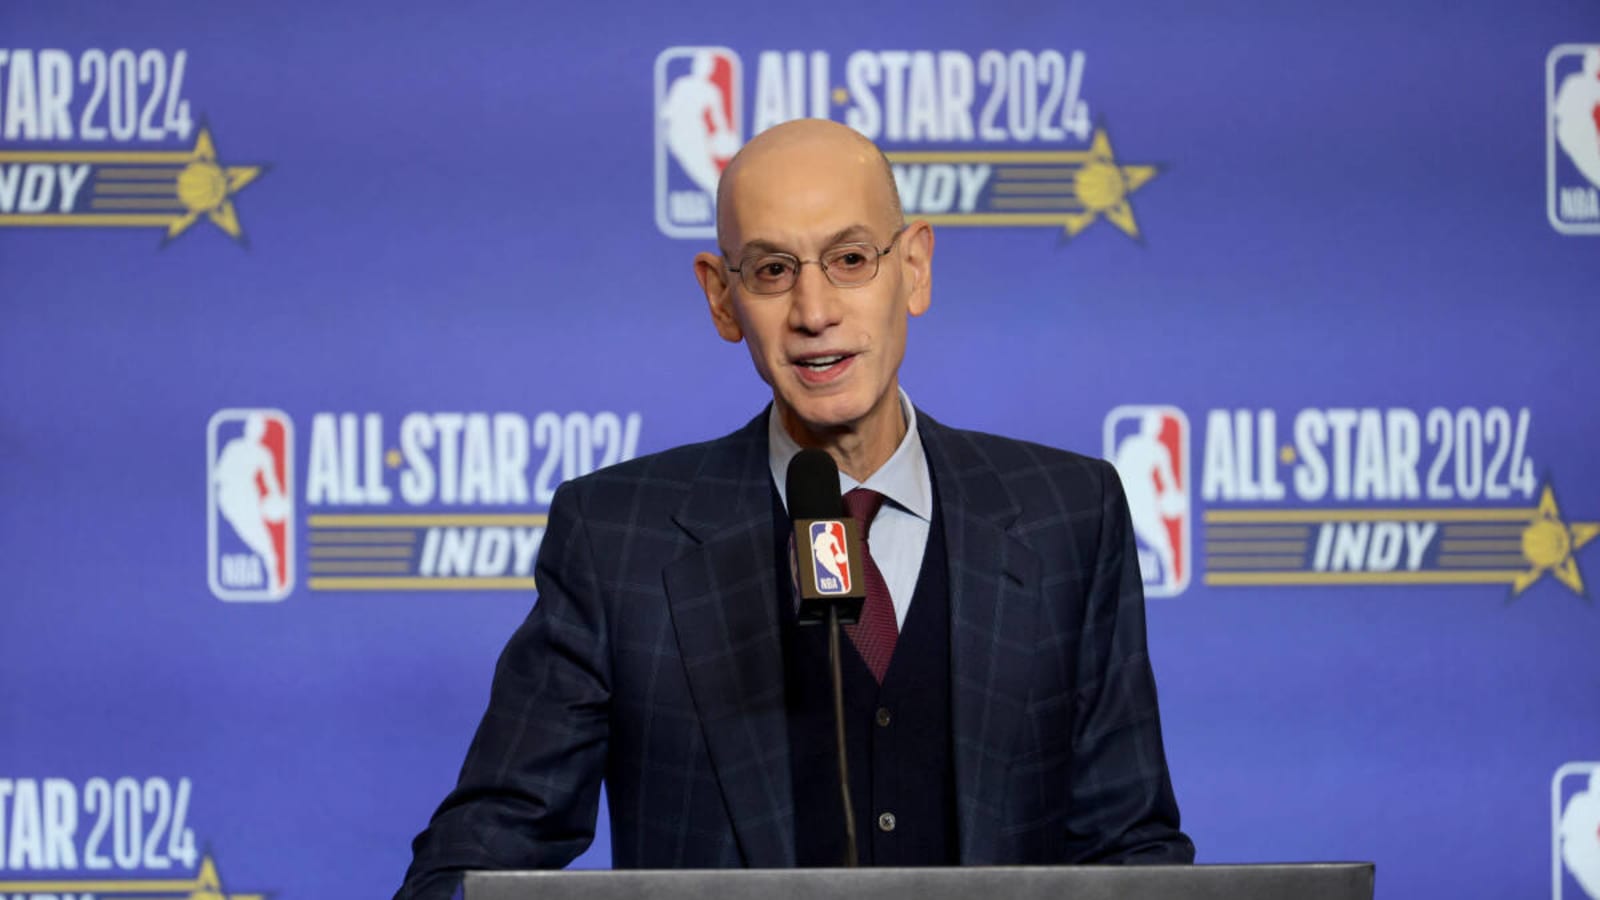 NBA Commissioner Adam Silver praises Indianapolis for hosting of NBA All-Star weekend